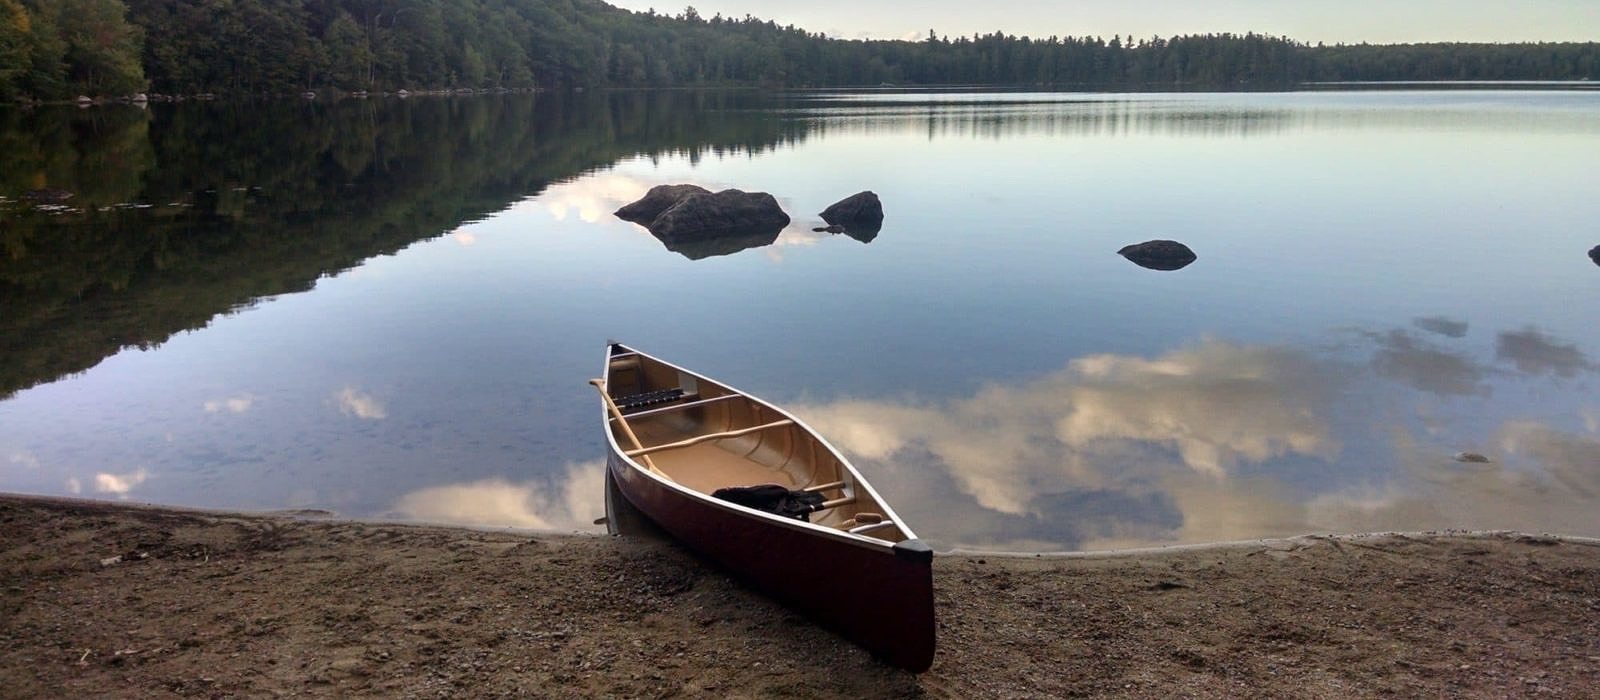 A canoe is ready to launch at Willard Pond, Antrim, NH. (photo © Brett Amy Thelen)